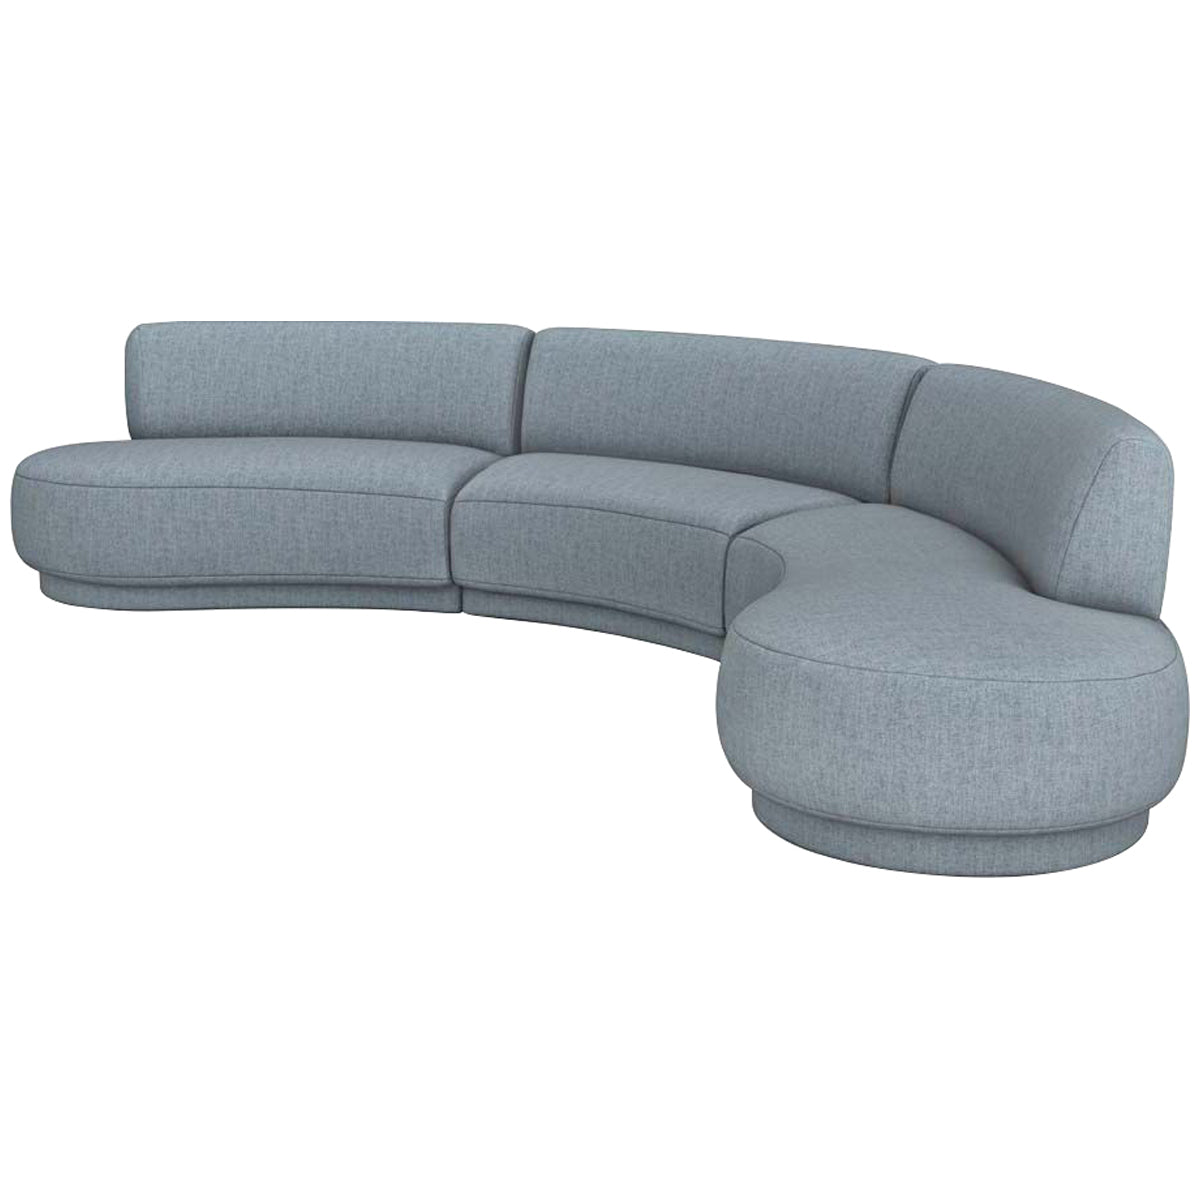 Interlude Home Nuage Sectional - Marsh